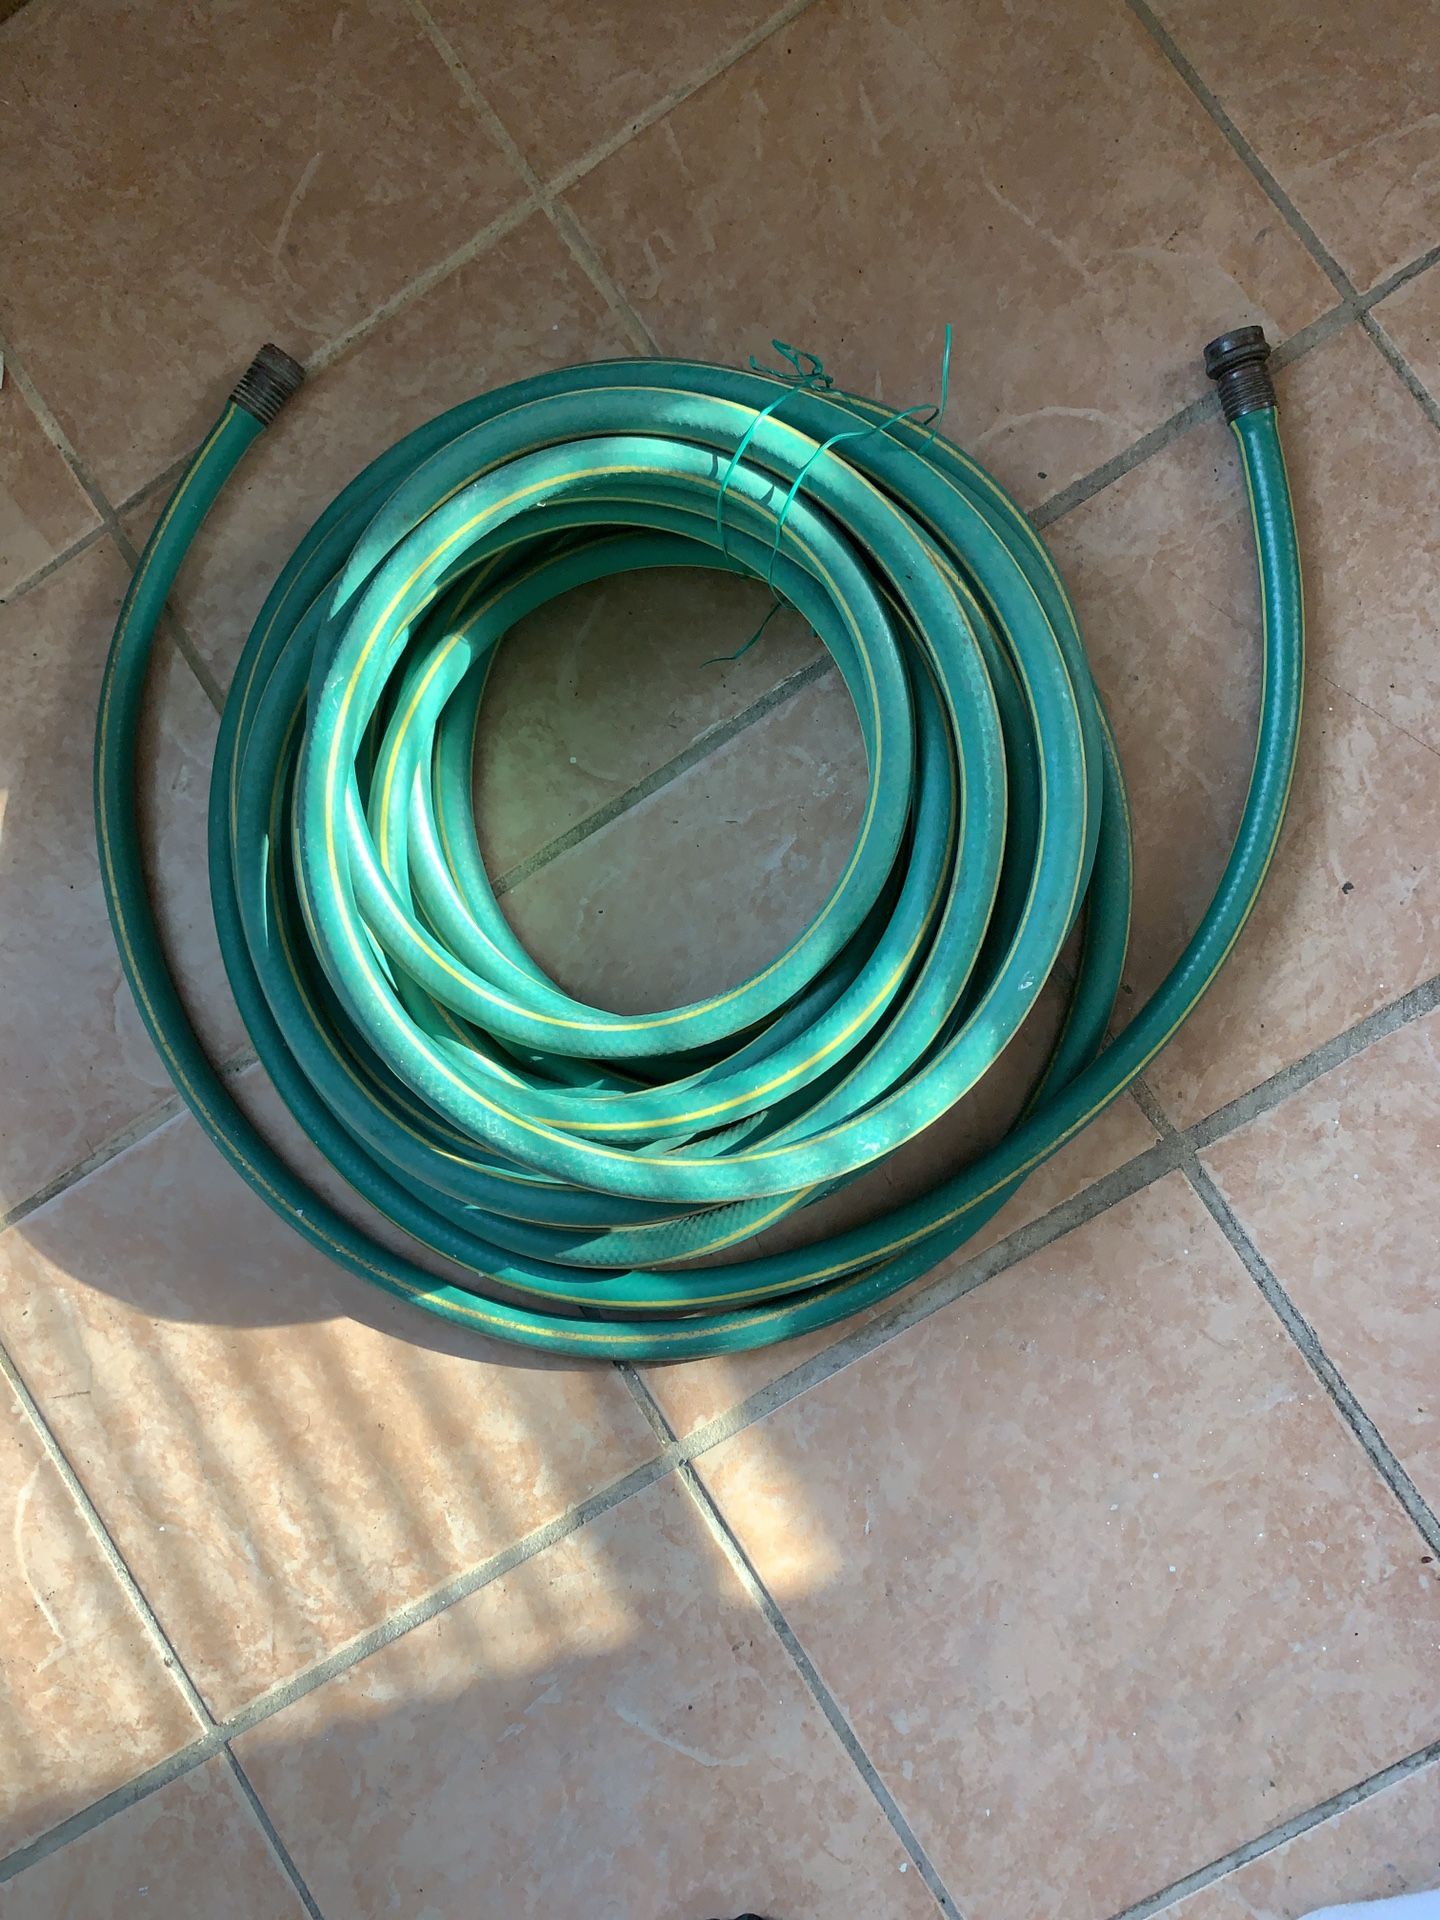 50 foot heavy duty garden hose. Used less than one year. No holes. 50' feet ft HD water hose.